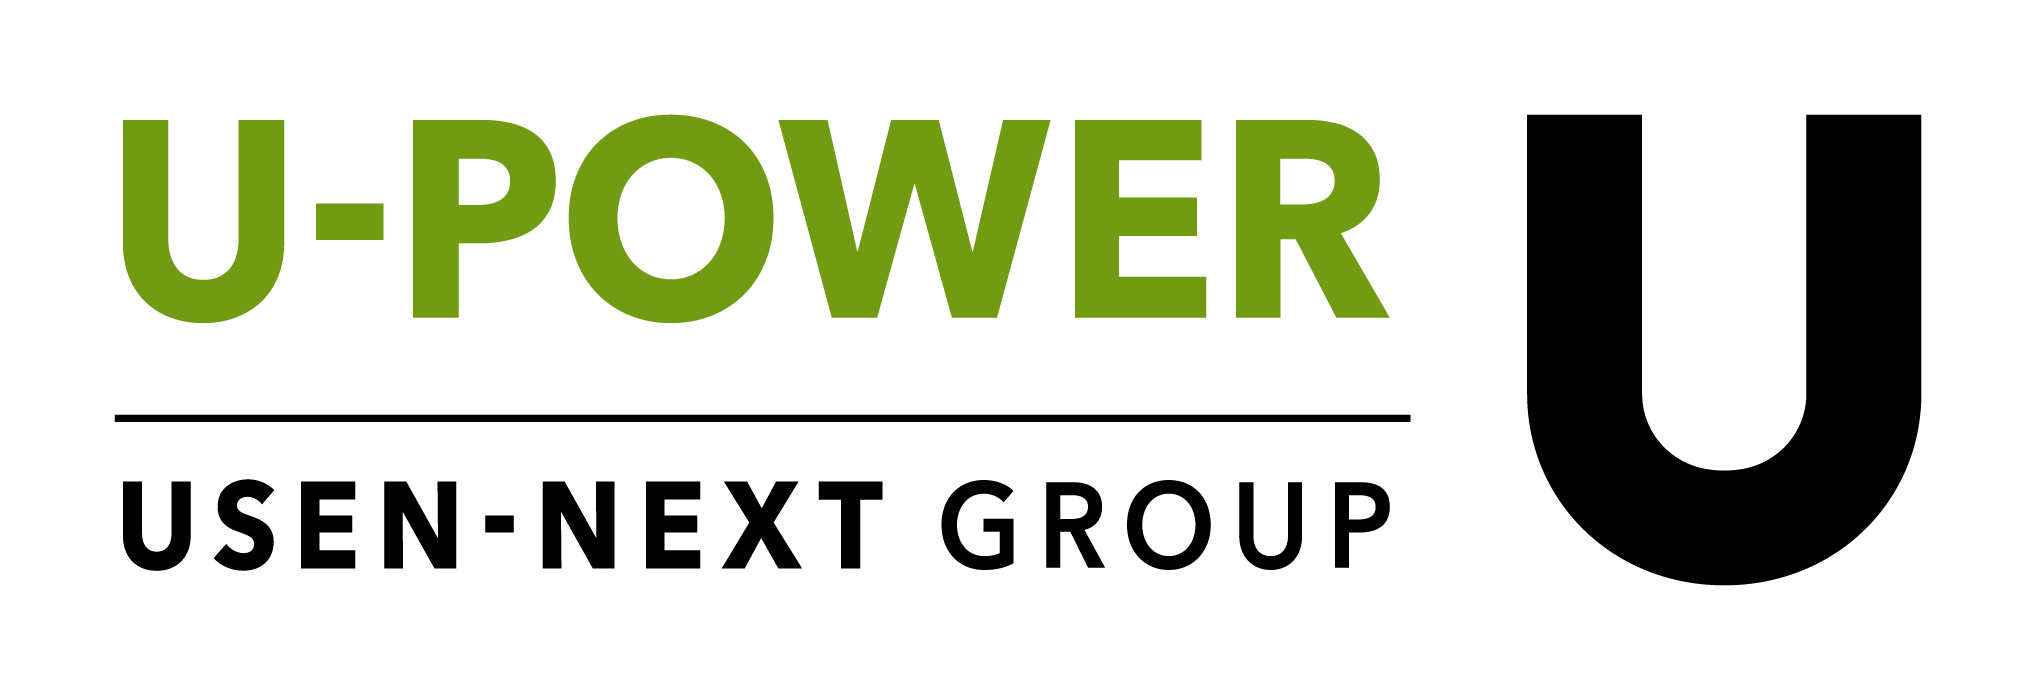 UPOWER_horizontal_basic_tr.png